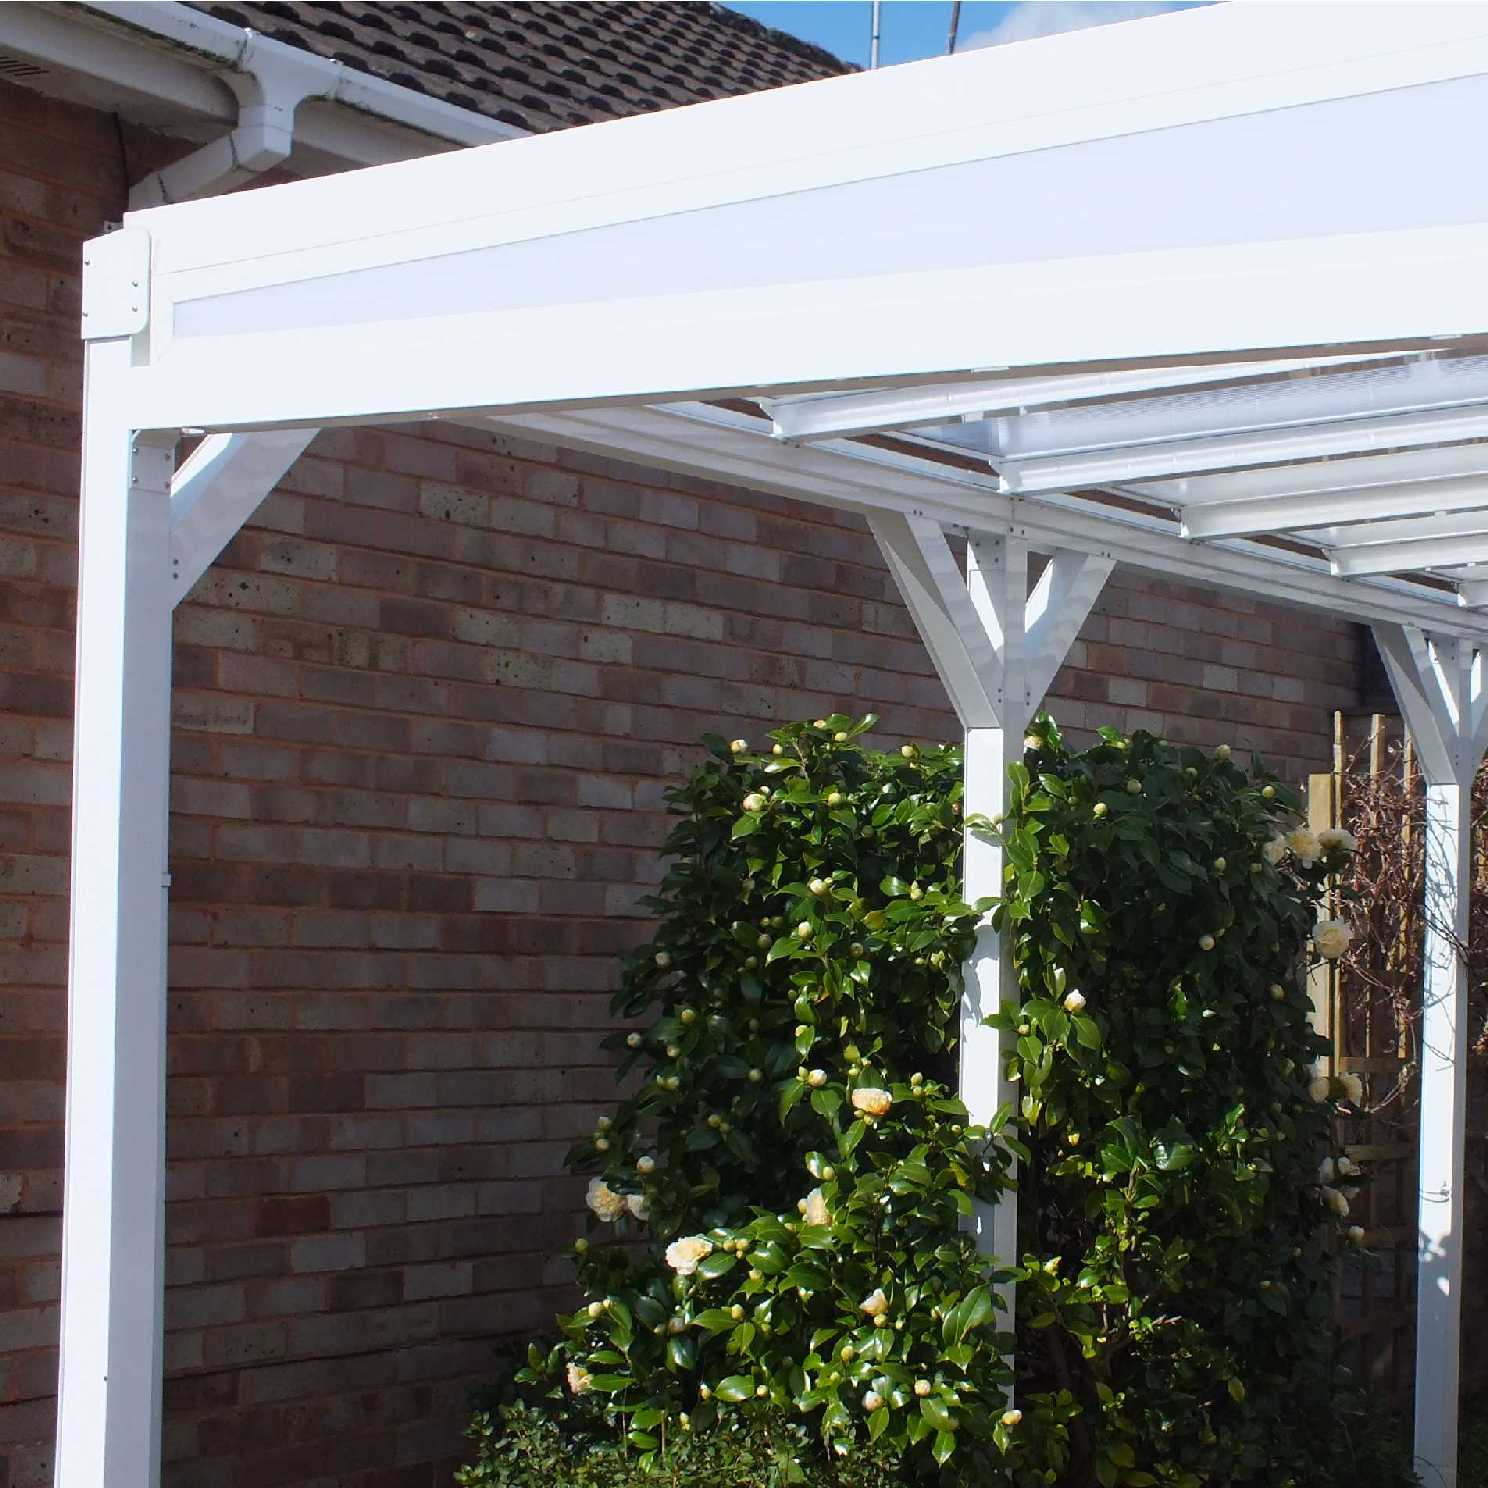 Omega Smart Lean-To Canopy, White with 16mm Polycarbonate Glazing - 7.8m (W) x 4.0m (P), (4) Supporting Posts from Omega Build